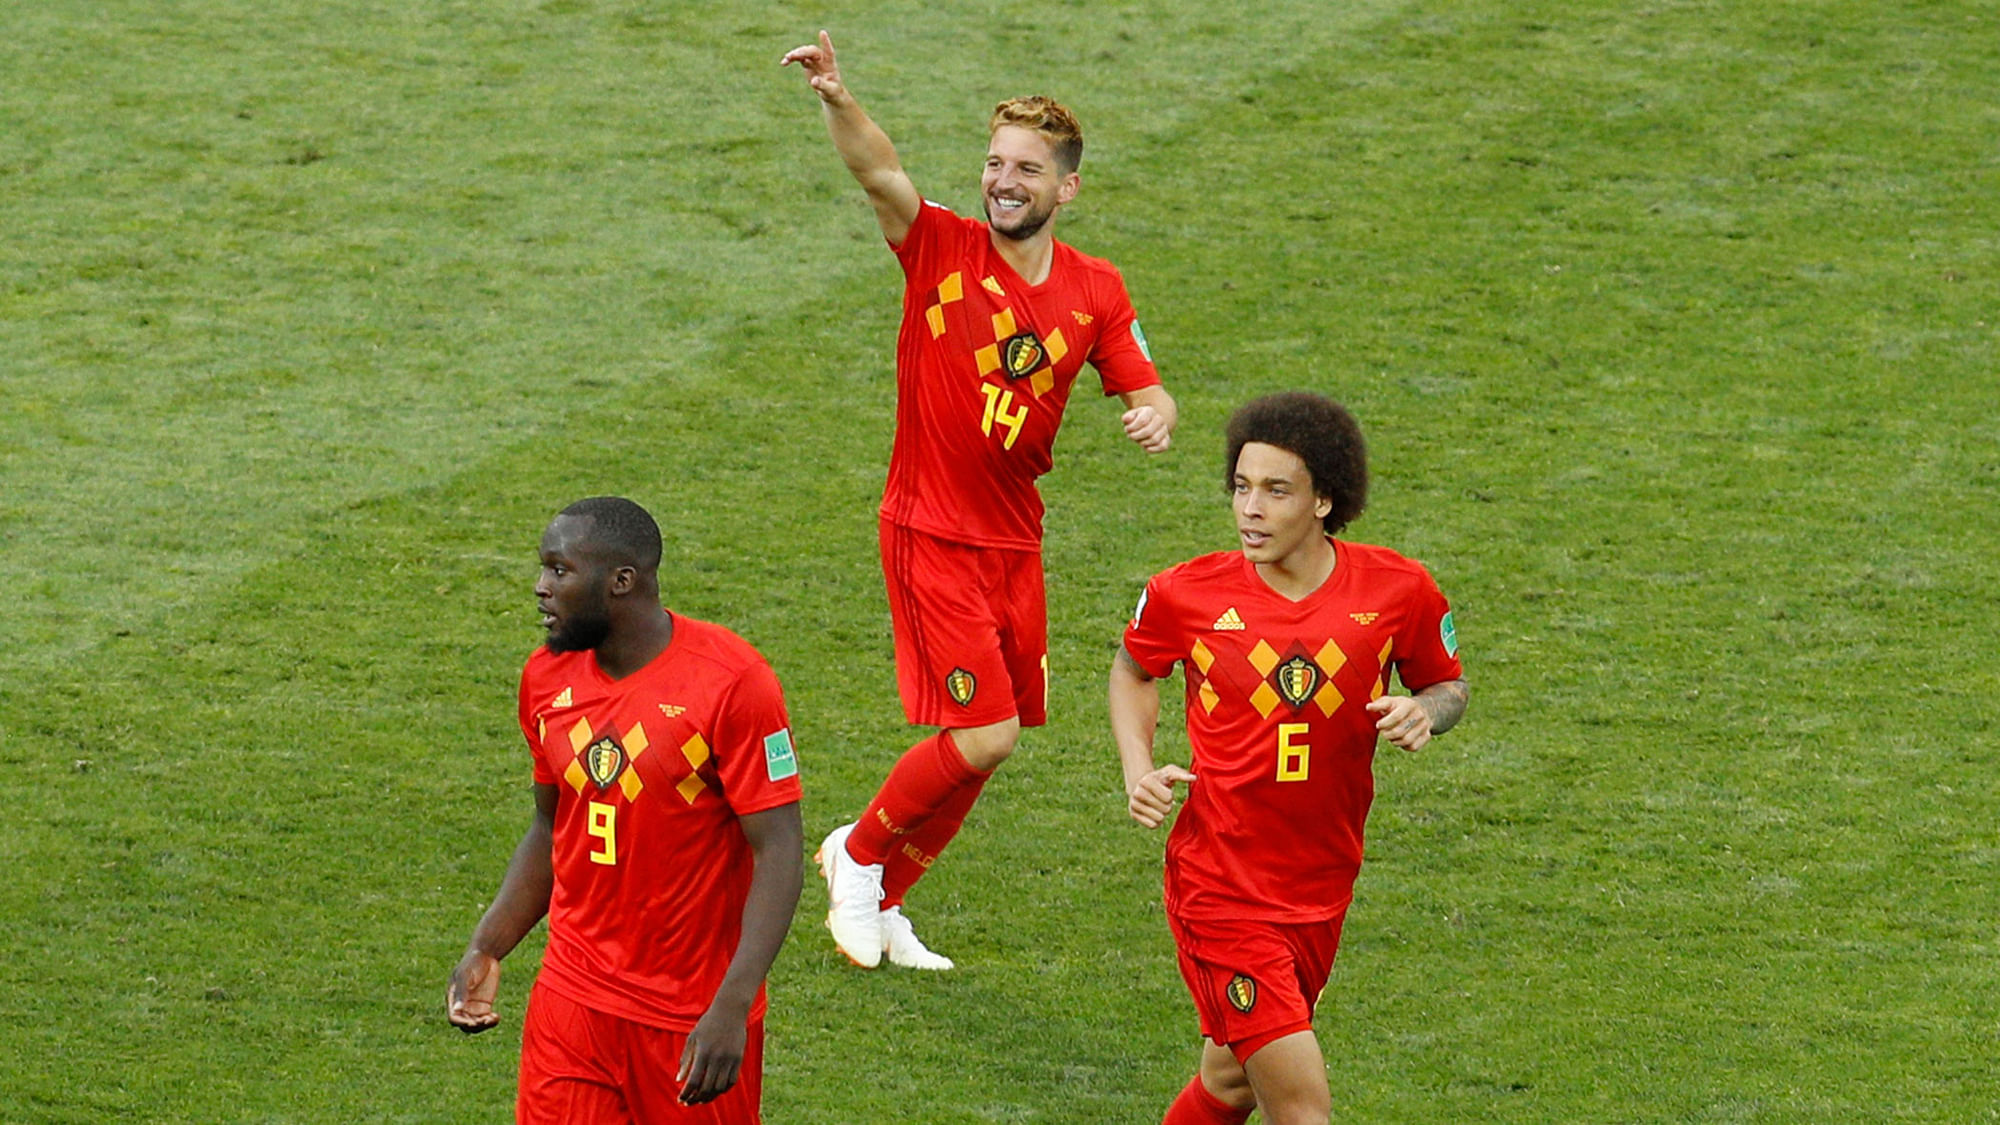 A stunning volley from Dries Mertens and a brace by Romelu Lukaku helped the Red Devils cruise to a 3-0 victory.